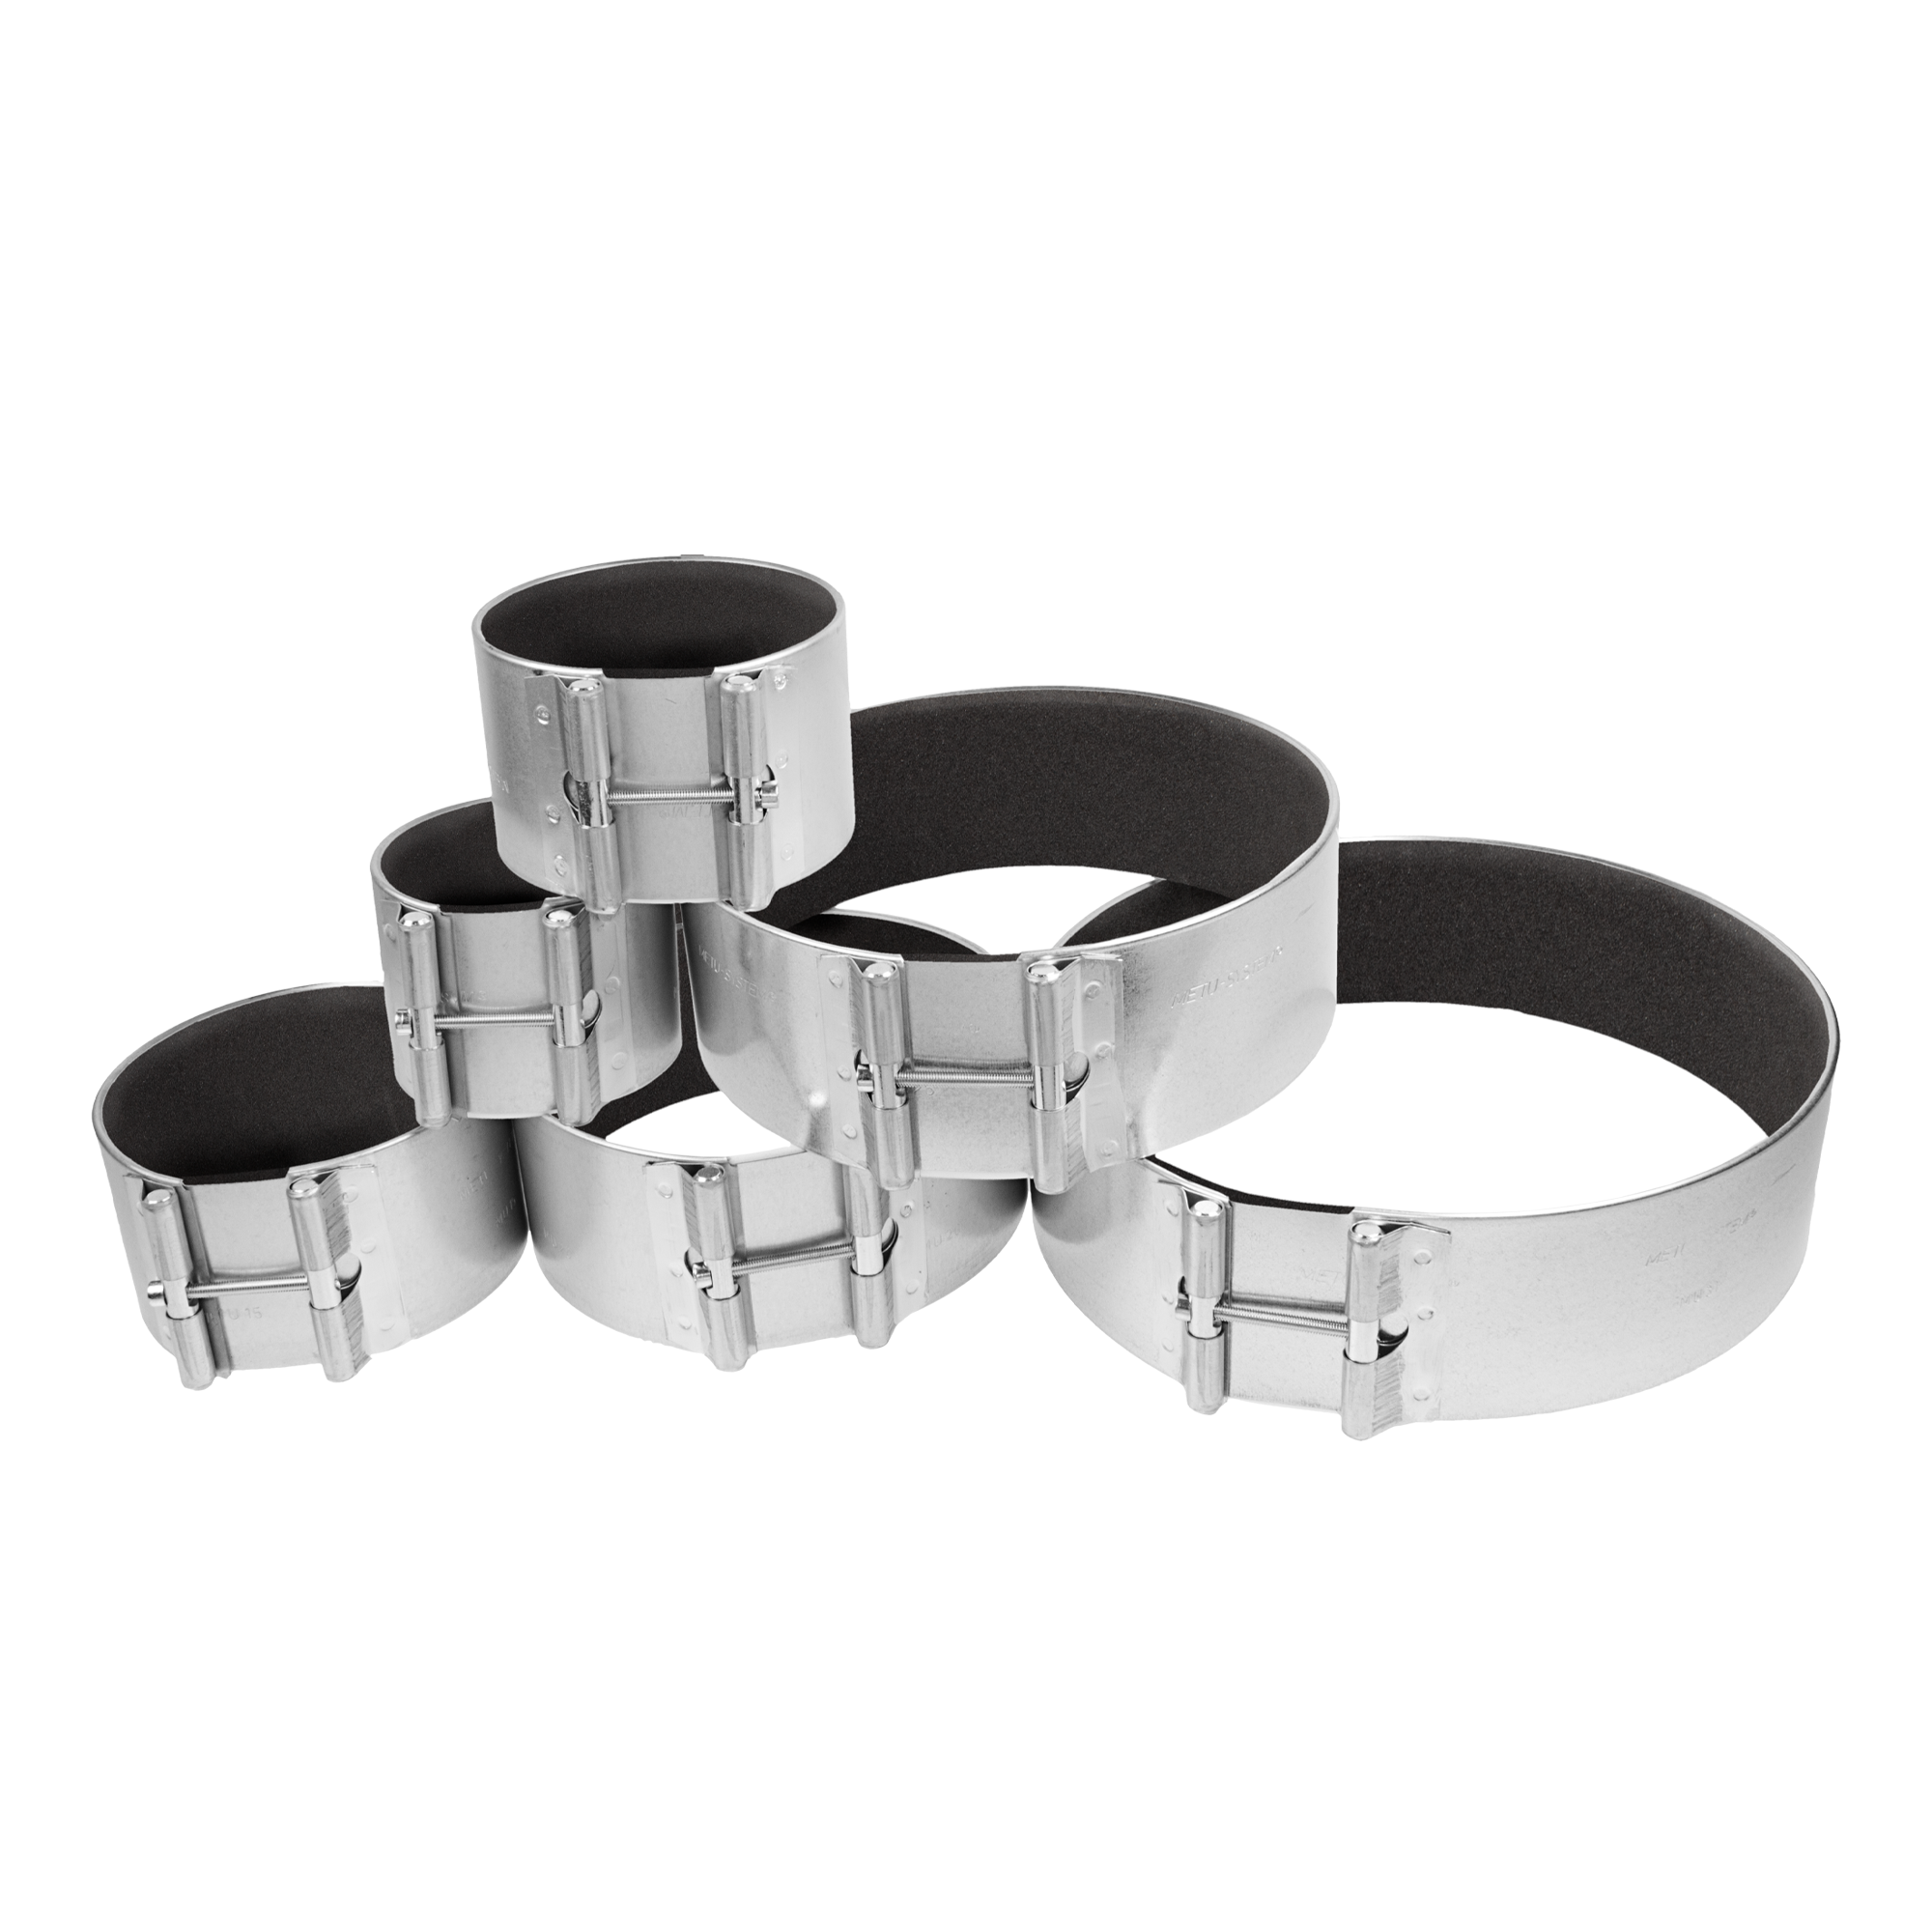 Metu Padded Clamps / Collars for Ducting